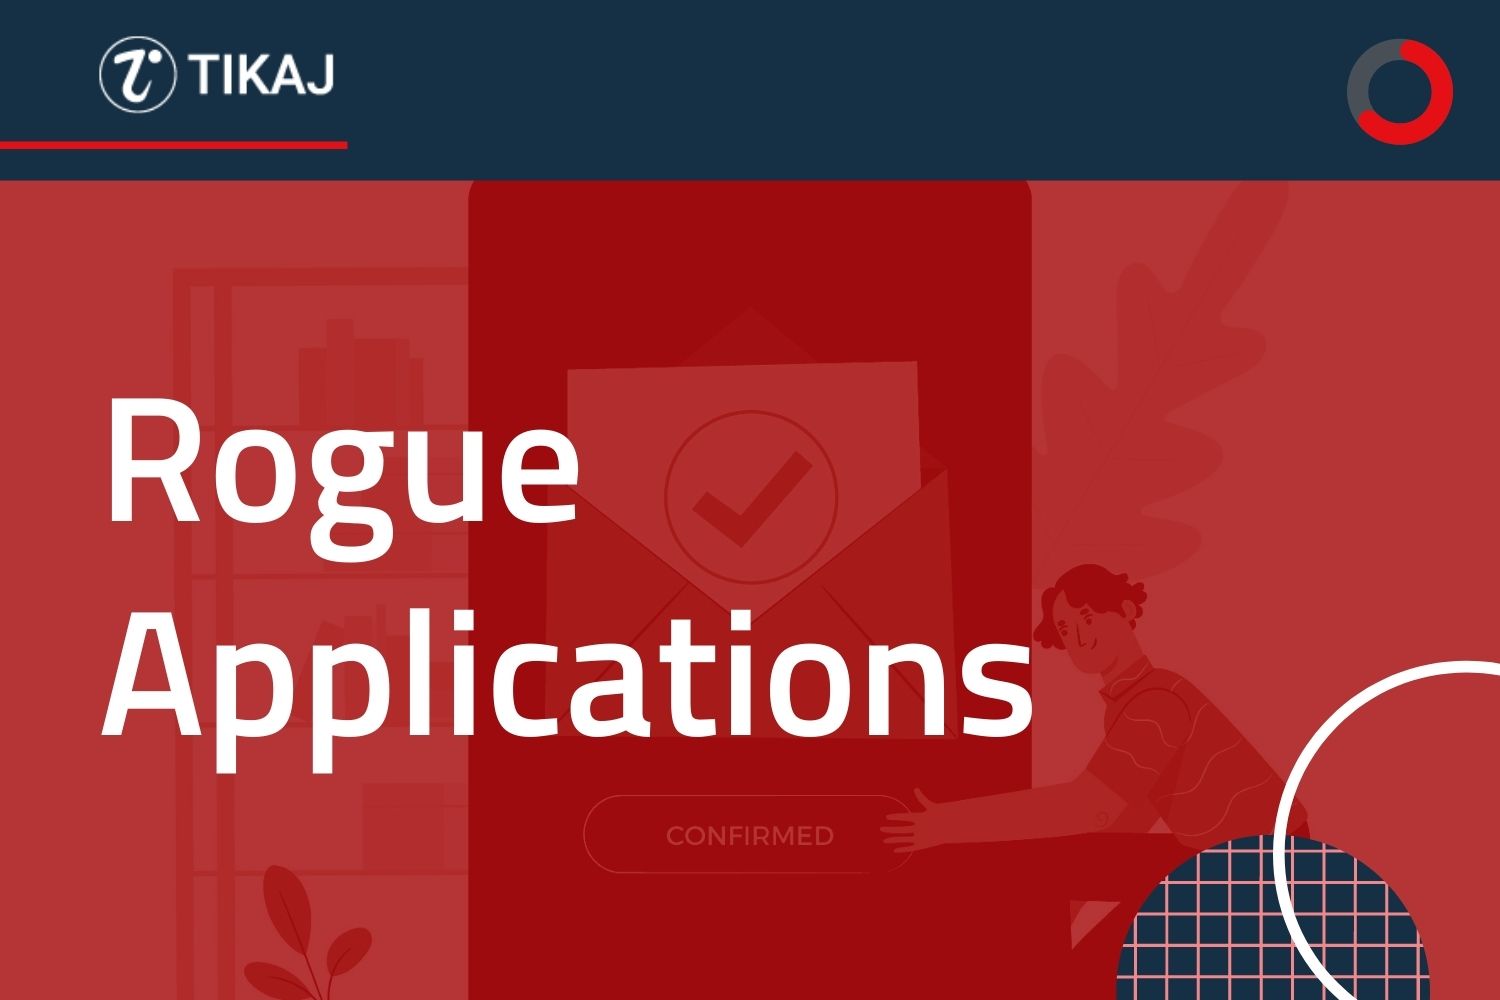 Rogue Applications: The problem and solution